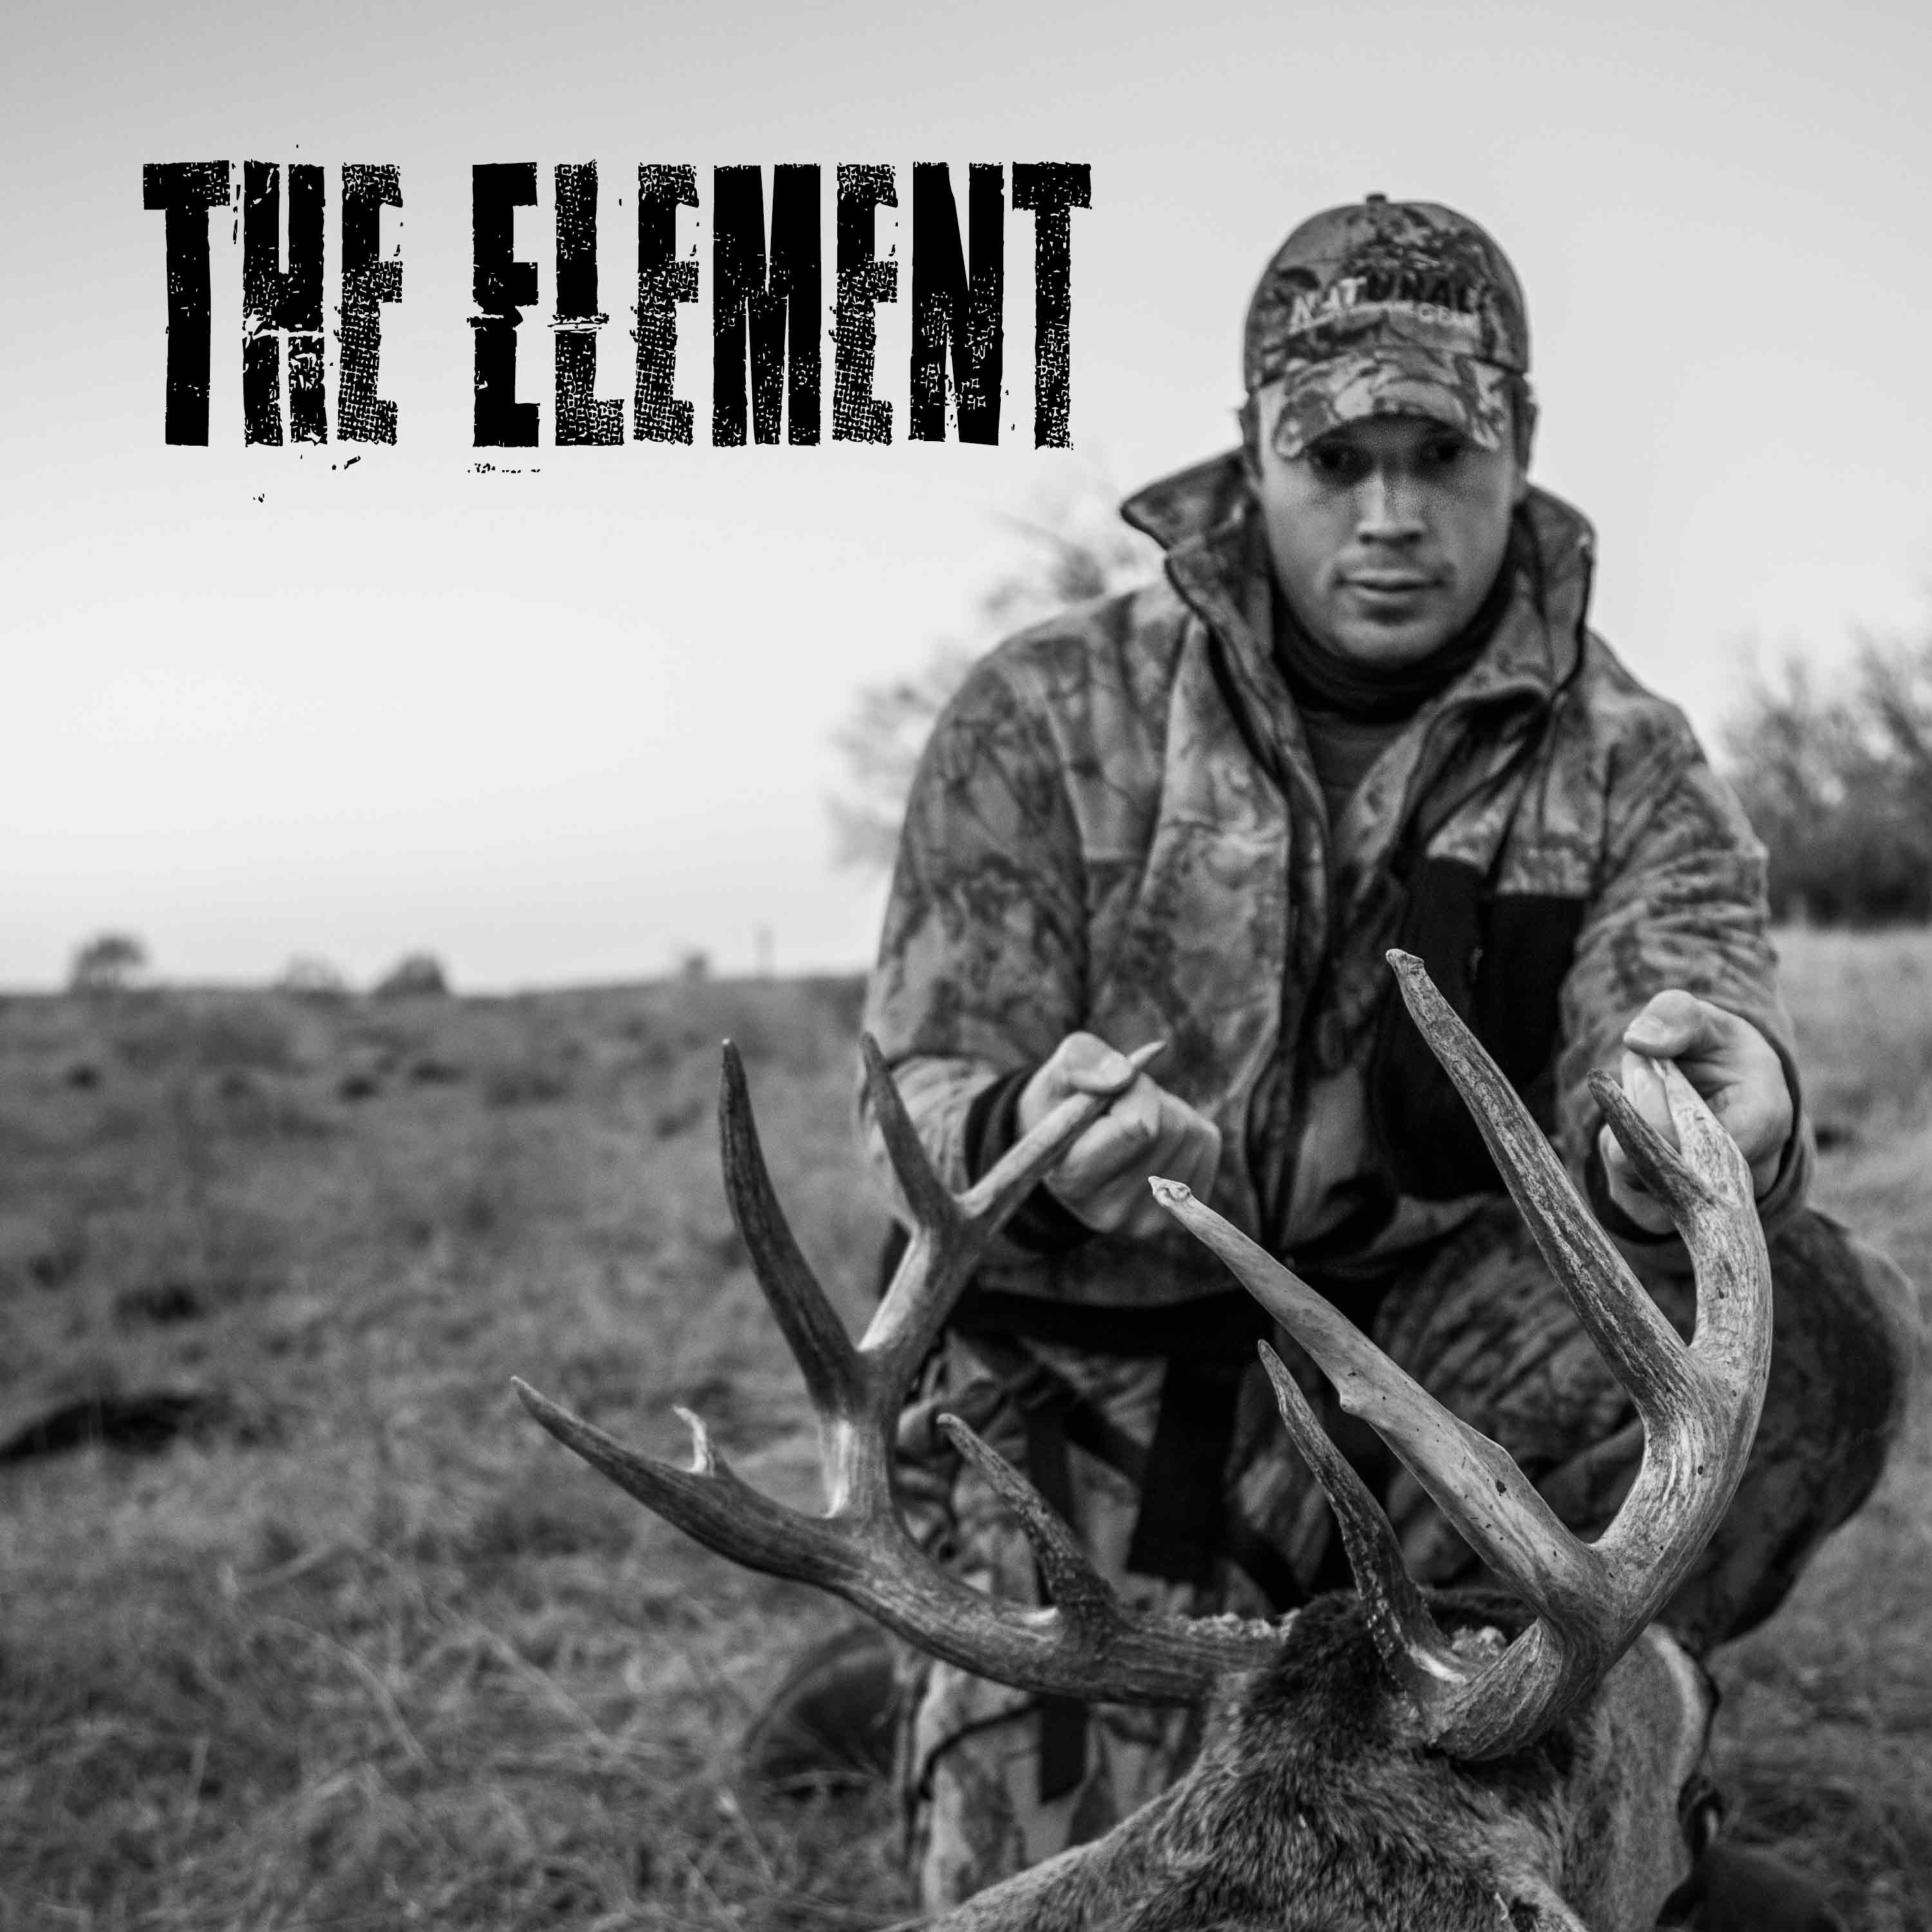 E228: Tyler‘s BIGGEST Buck Ever!?! Hunting Public Land Kansas Giants (Stalking Deer With Onx Maps, Long Shots With Archery Gear, Saddle and Ground Hunting, Rut FOMO, Giving Thanks This Thanksgiving)